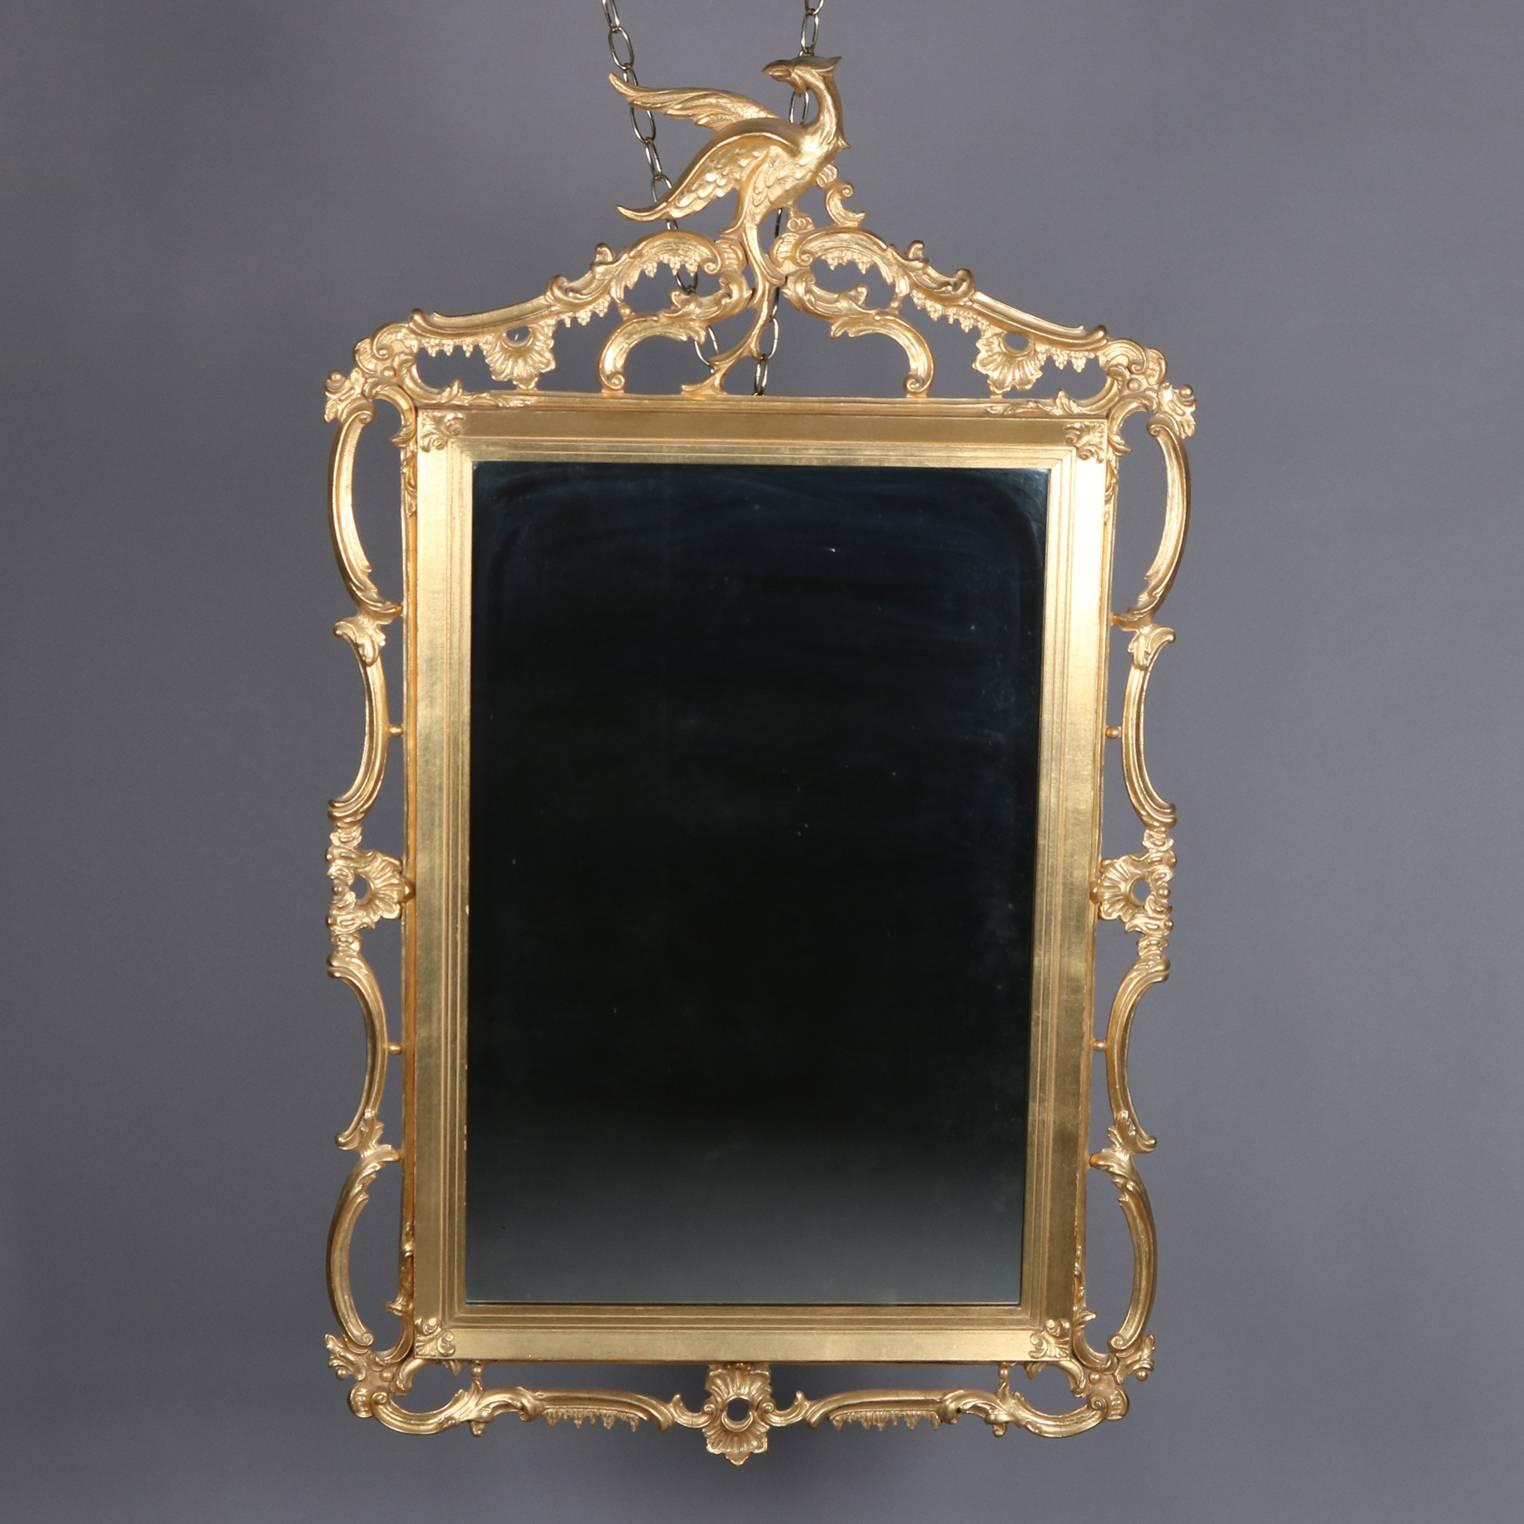 Federal Chippendale style giltwood wall mirror features pierced foliate, gadroon floral, and scroll form frame with Phoenix crest, 20th century

Measures: fr: 50